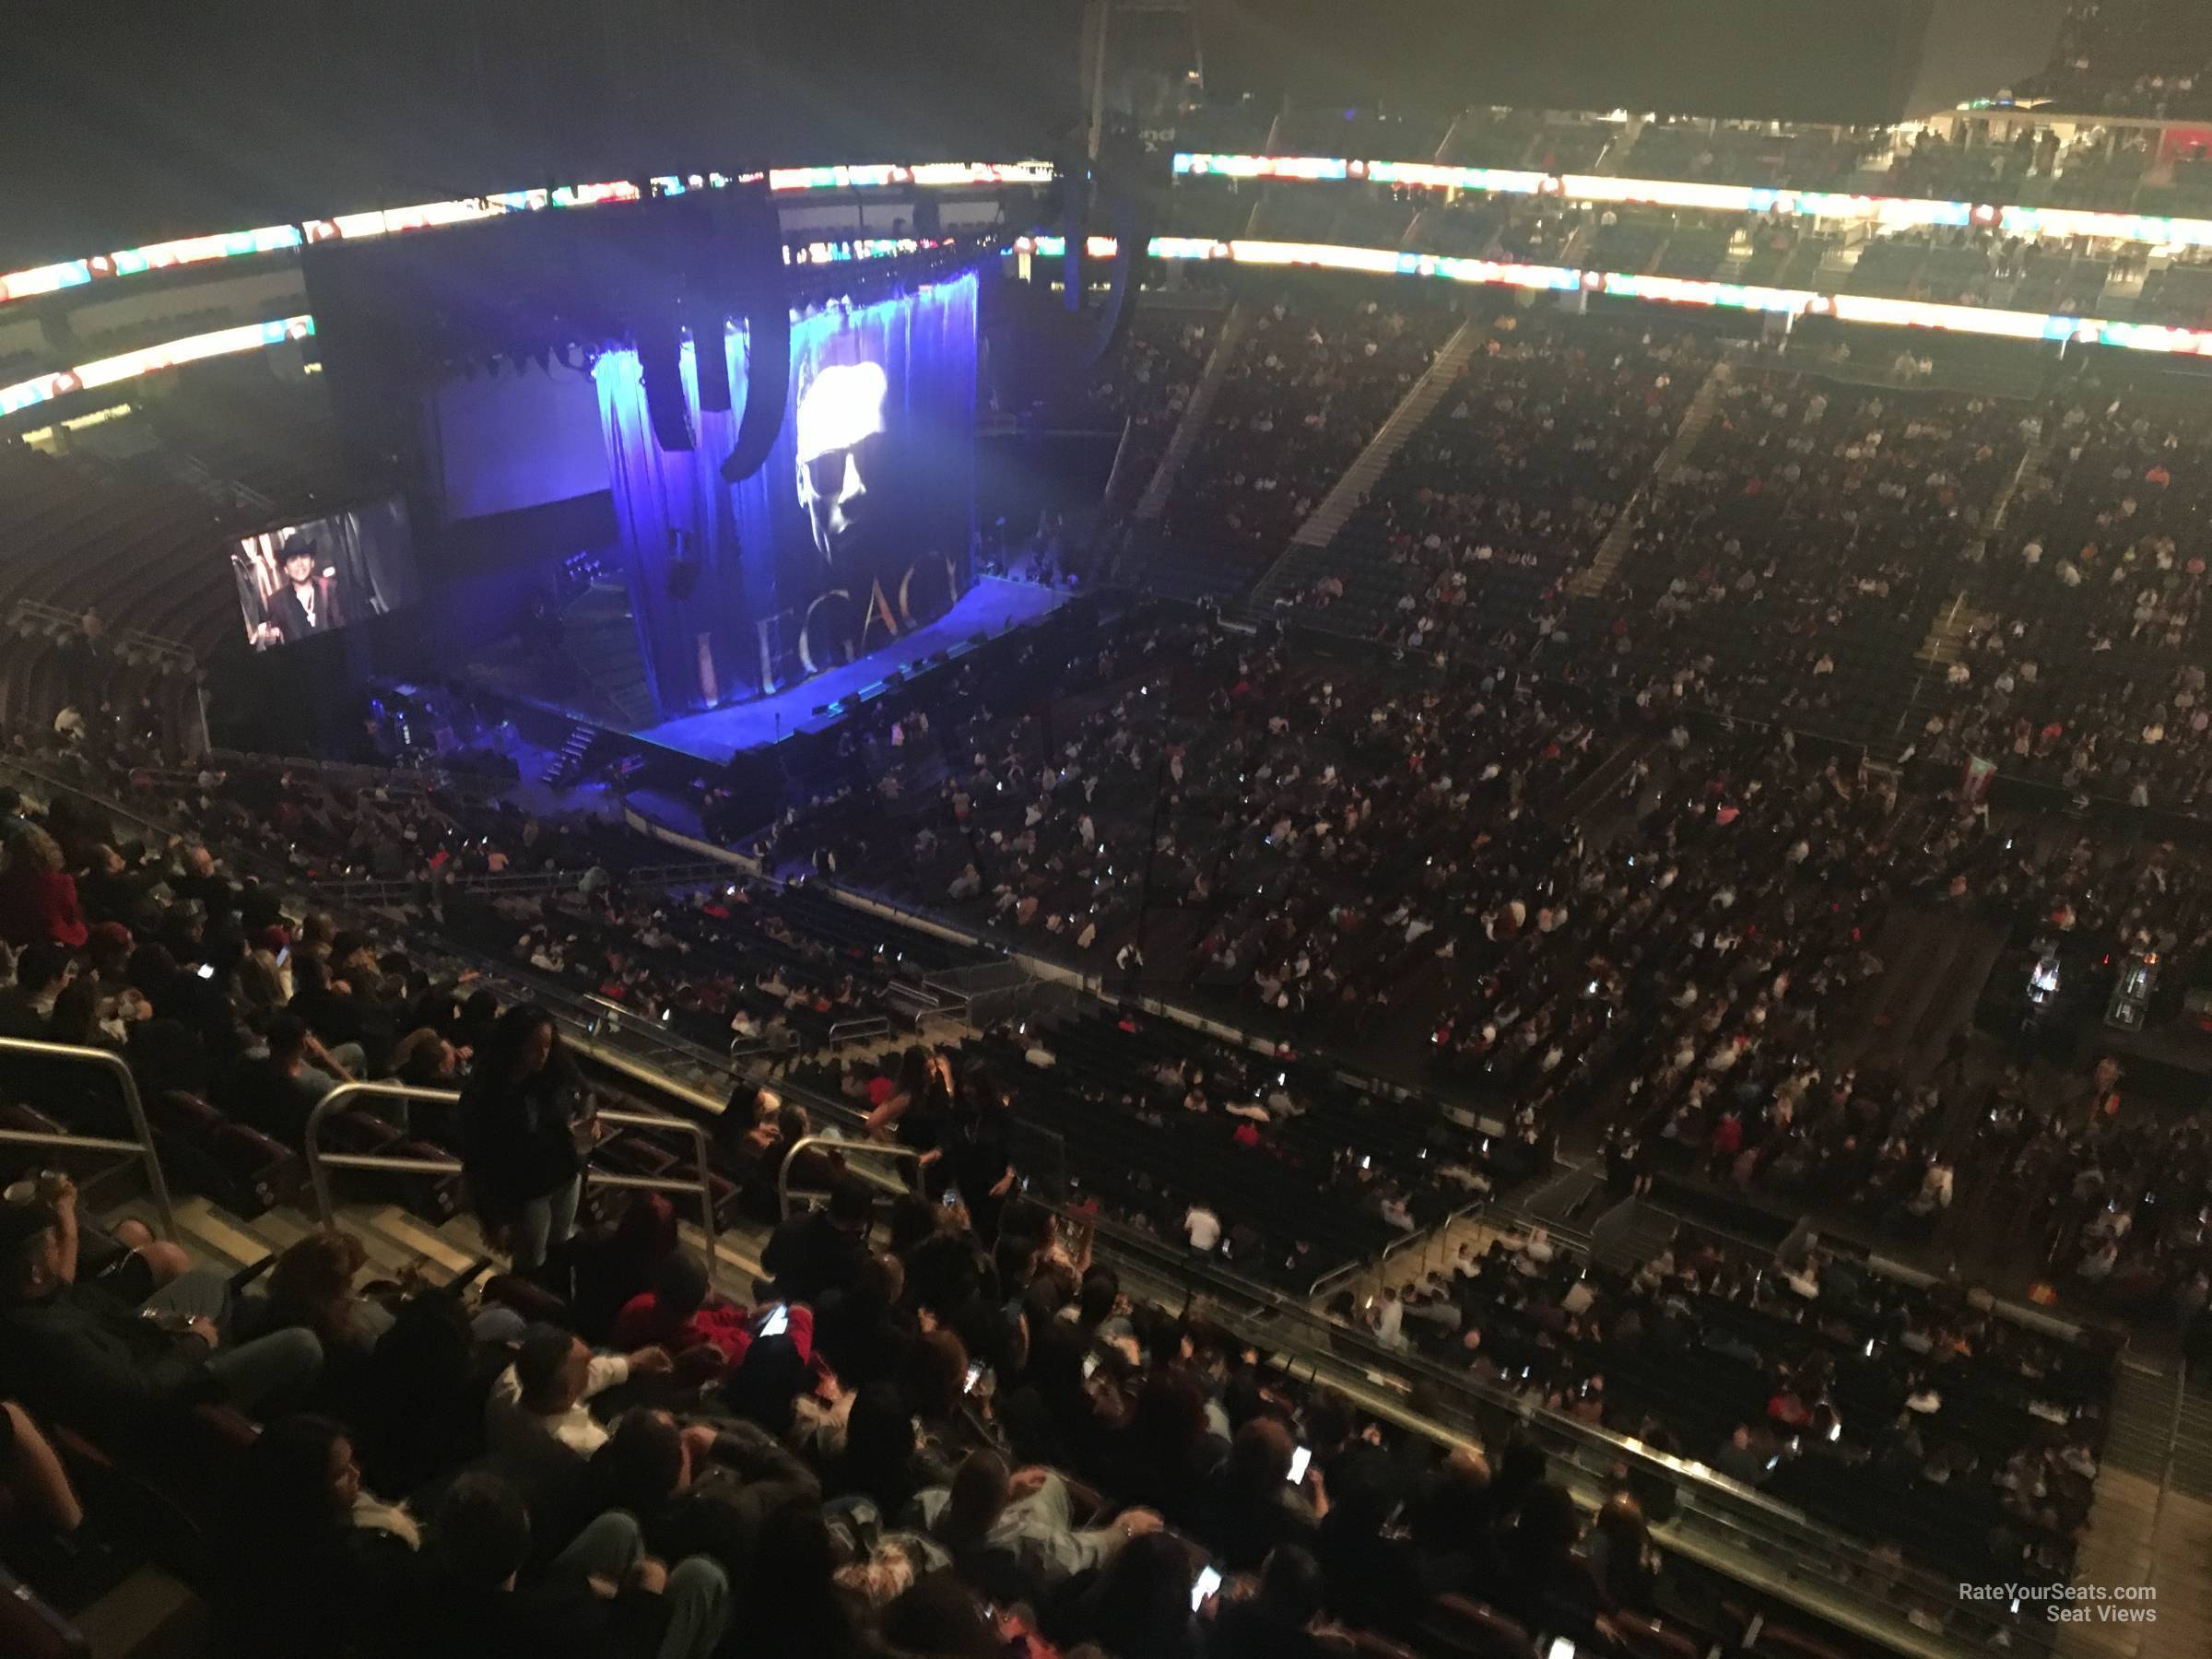 Section 231 at Prudential Center for Concerts